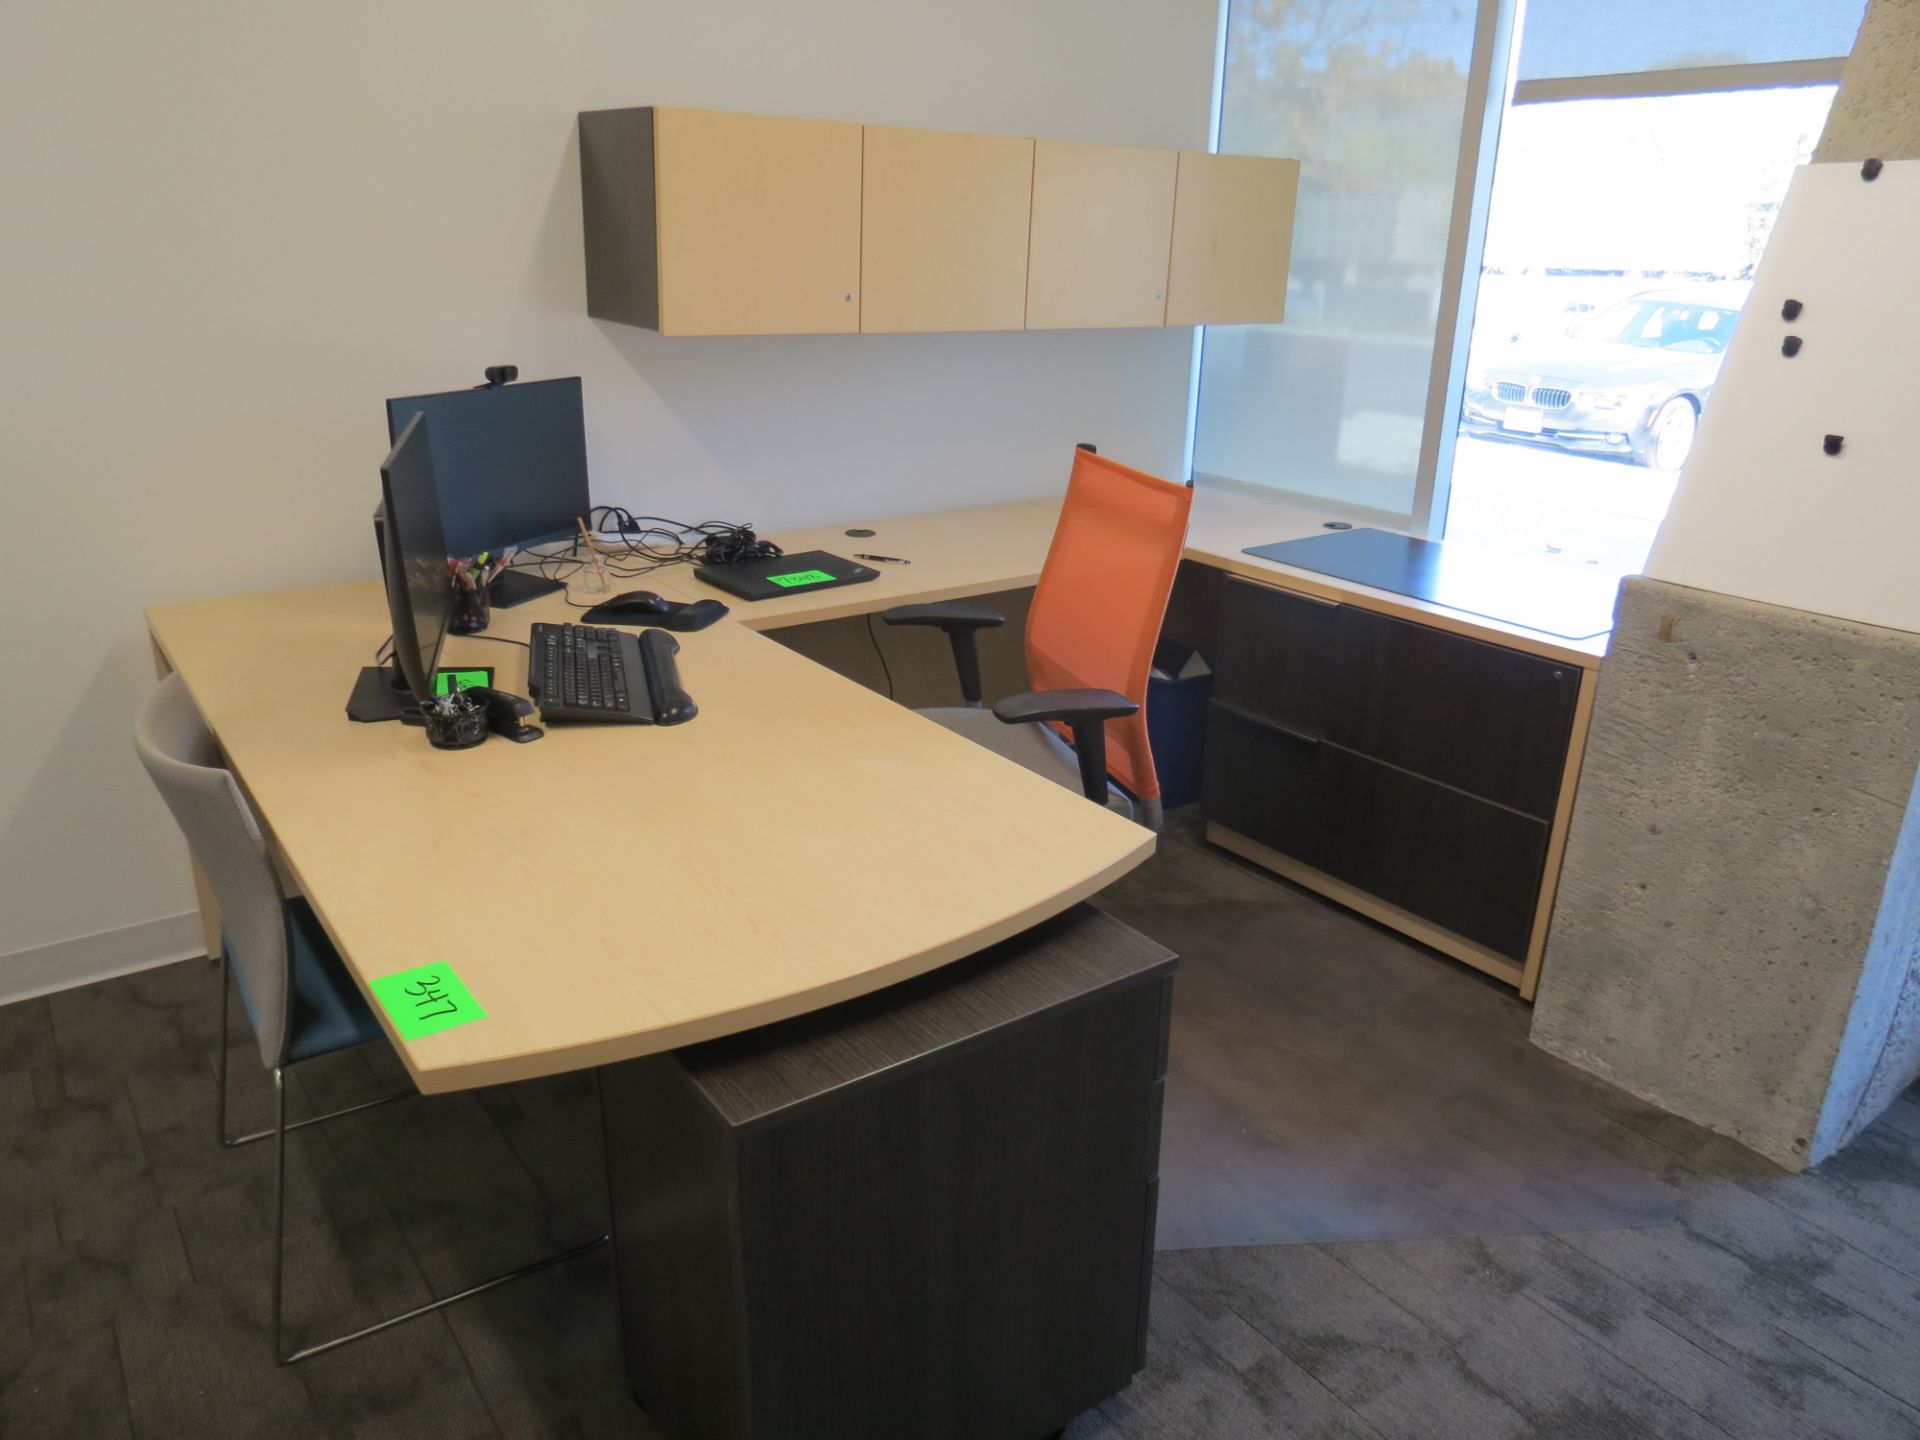 LOT OF OFFICE FURNITURES: U-SHAPED DESK WITH, HUTCH, CHAIRS /W WHITE BOARD ON WALL - Image 2 of 3